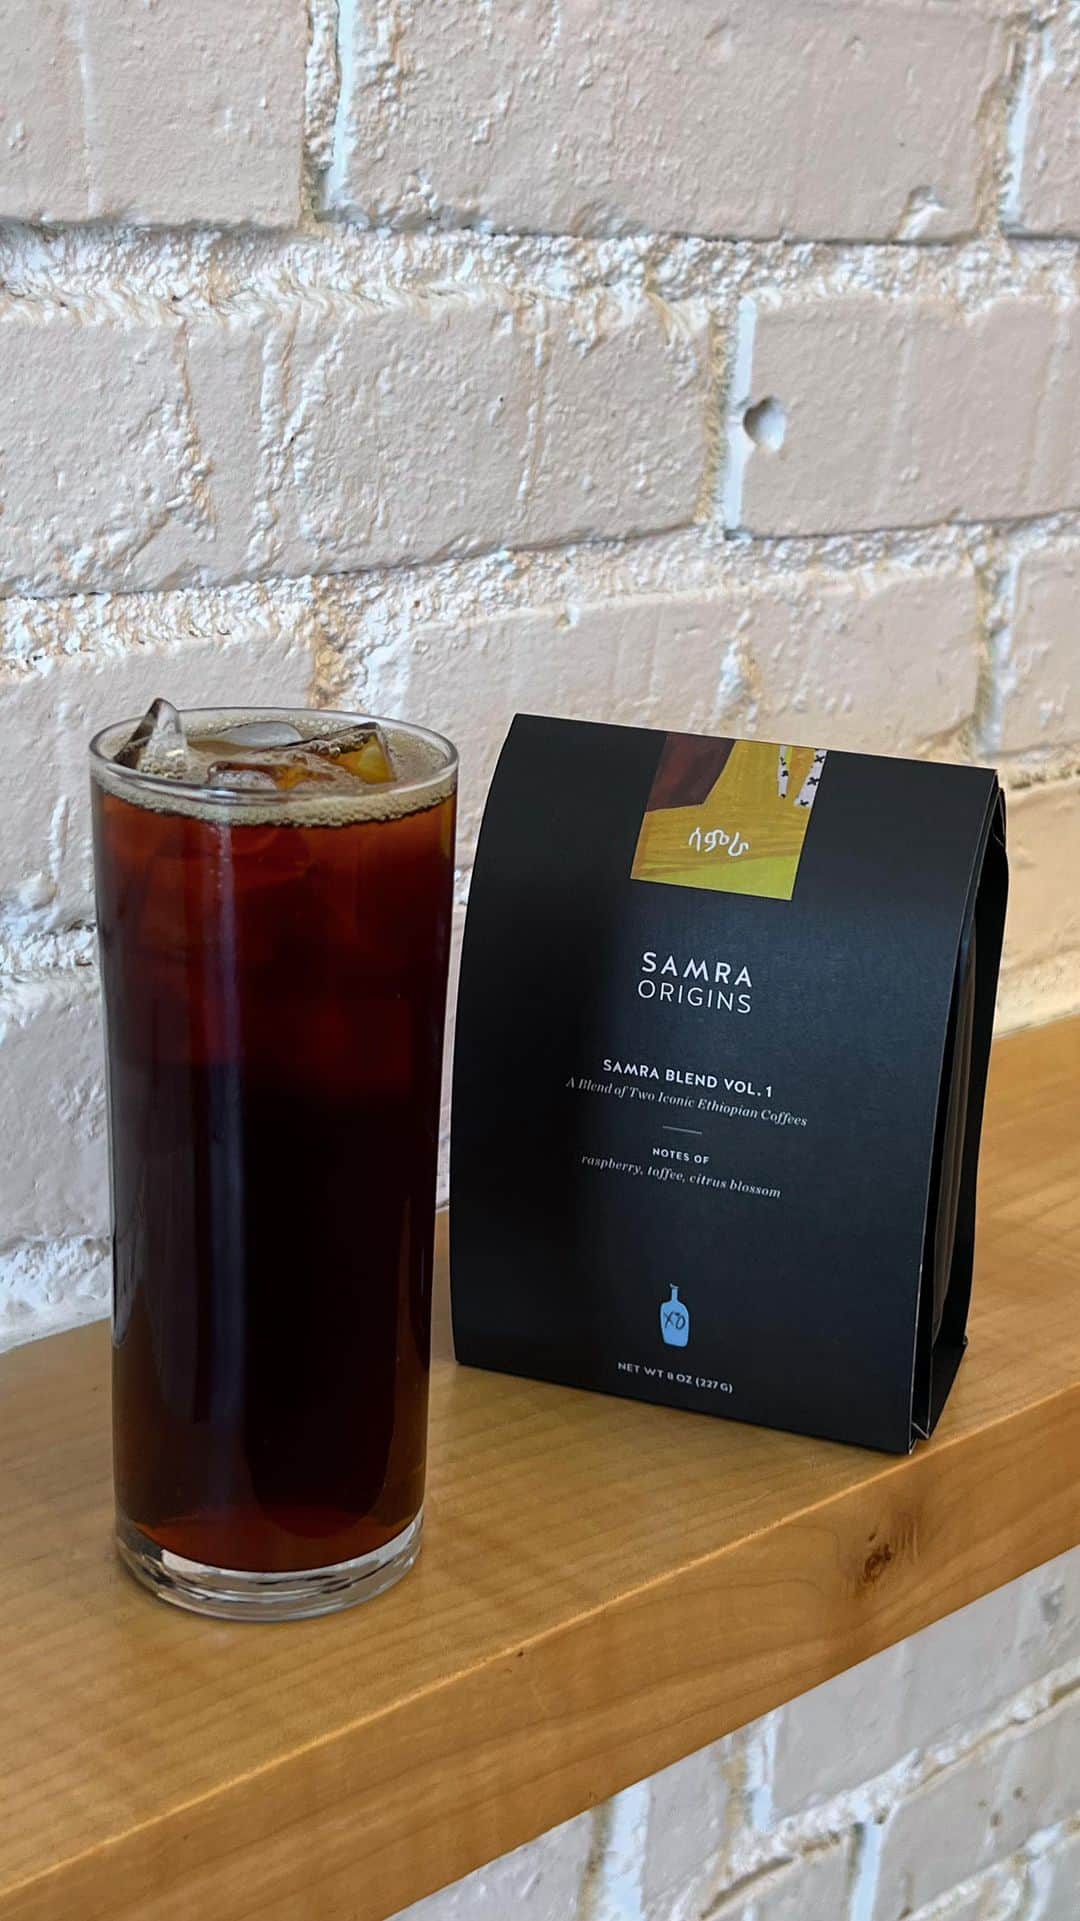 Blue Bottle Coffeeのインスタグラム：「Learn how to brew your Samra Blend Vol. 1 from the best. Grab a bag at select cafes and follow along with our barista at home. Check the cafe list at the link in our bio or head to samraorigins.com.  What You’ll Need: 12oz Glass Samra Blend Vol. 1 Scale Carafe Dripper Filter Grinder  How To Prepare: 1. Grind 25g of Samra Blend Vol 1. 2. Measure 100g of ice into a clean carafe, place dripper on top 3. Add coffee and bloom to 40g 4. At 40 seconds, bring the total water weight to 125g 5. at 1:10, bring the total water weight to 200g 6. Let the coffee finish brewing then pour over a cup two-thirds full of ice」